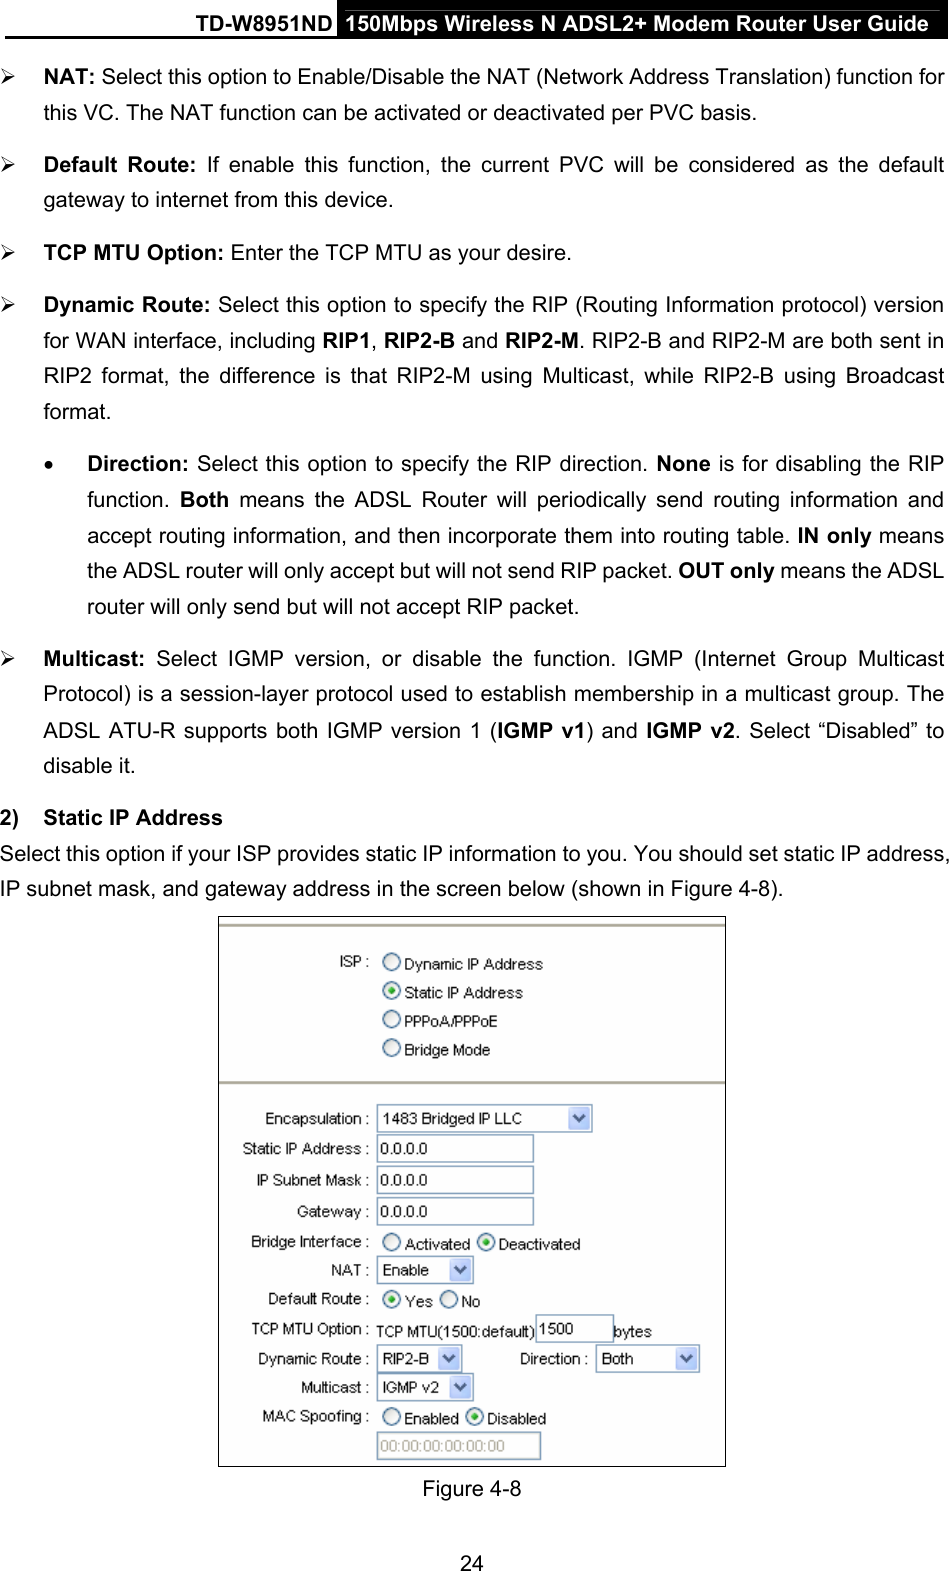 TD-W8951ND  150Mbps Wireless N ADSL2+ Modem Router User Guide ¾ NAT: Select this option to Enable/Disable the NAT (Network Address Translation) function for this VC. The NAT function can be activated or deactivated per PVC basis. ¾ Default Route: If enable this function, the current PVC will be considered as the default gateway to internet from this device. ¾ TCP MTU Option: Enter the TCP MTU as your desire. ¾ Dynamic Route: Select this option to specify the RIP (Routing Information protocol) version for WAN interface, including RIP1, RIP2-B and RIP2-M. RIP2-B and RIP2-M are both sent in RIP2 format, the difference is that RIP2-M using Multicast, while RIP2-B using Broadcast format.  • Direction: Select this option to specify the RIP direction. None is for disabling the RIP function.  Both means the ADSL Router will periodically send routing information and accept routing information, and then incorporate them into routing table. IN only means the ADSL router will only accept but will not send RIP packet. OUT only means the ADSL router will only send but will not accept RIP packet. ¾ Multicast:  Select IGMP version, or disable the function. IGMP (Internet Group Multicast Protocol) is a session-layer protocol used to establish membership in a multicast group. The ADSL ATU-R supports both IGMP version 1 (IGMP v1) and IGMP v2. Select “Disabled” to disable it. 2)  Static IP Address Select this option if your ISP provides static IP information to you. You should set static IP address, IP subnet mask, and gateway address in the screen below (shown in Figure 4-8).  Figure 4-8 24 